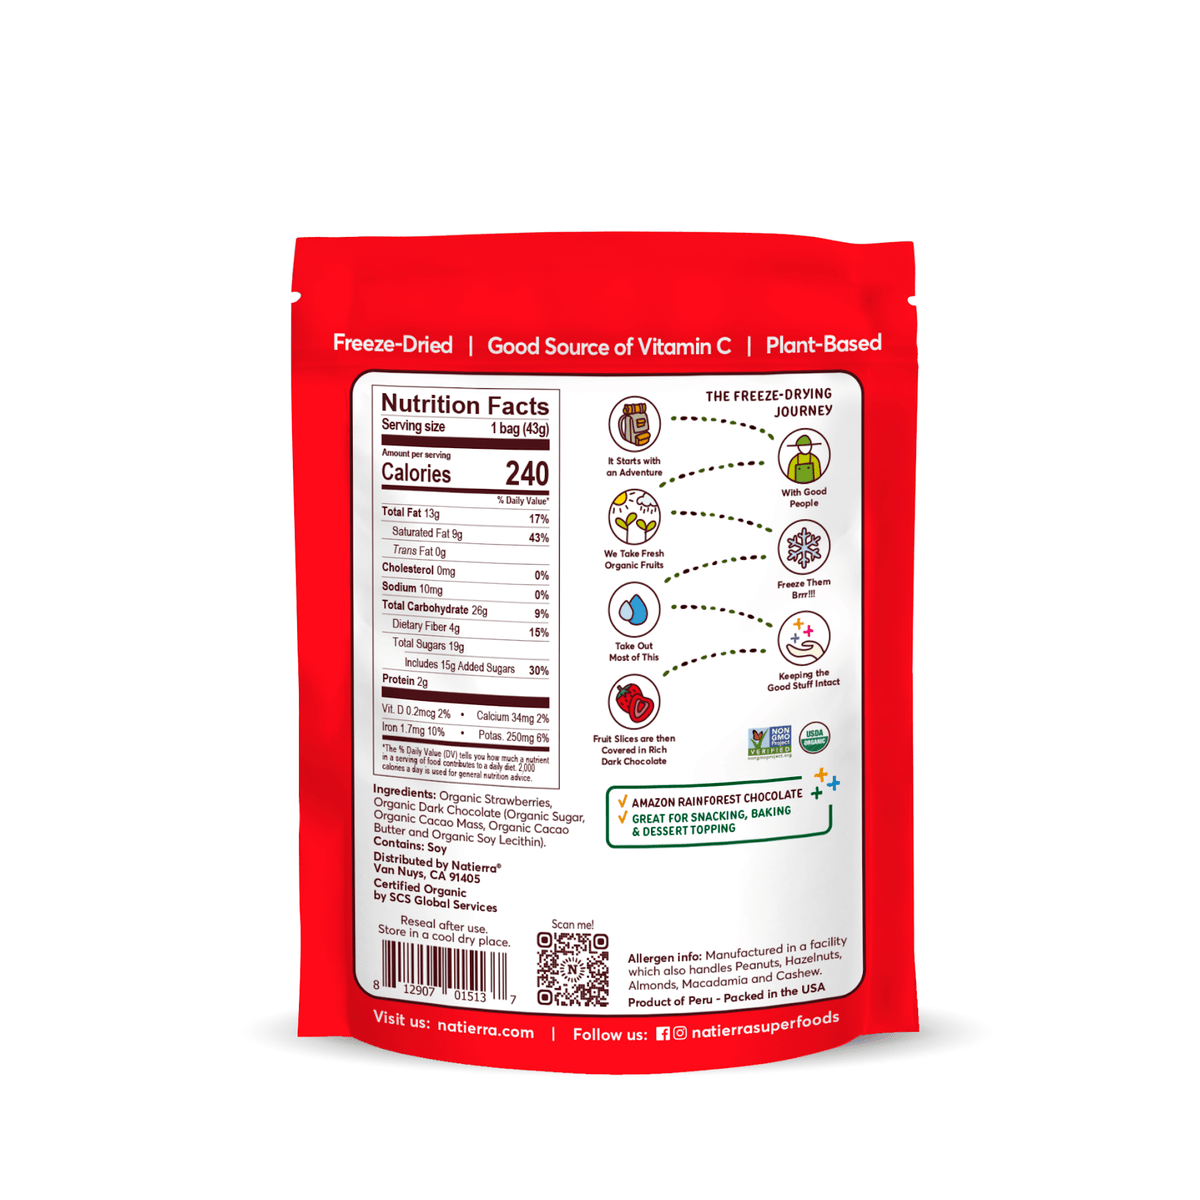 Natierra Organic Dark Chocolate Strawberry Slices Bag with Nutrition facts, journey and main product claims